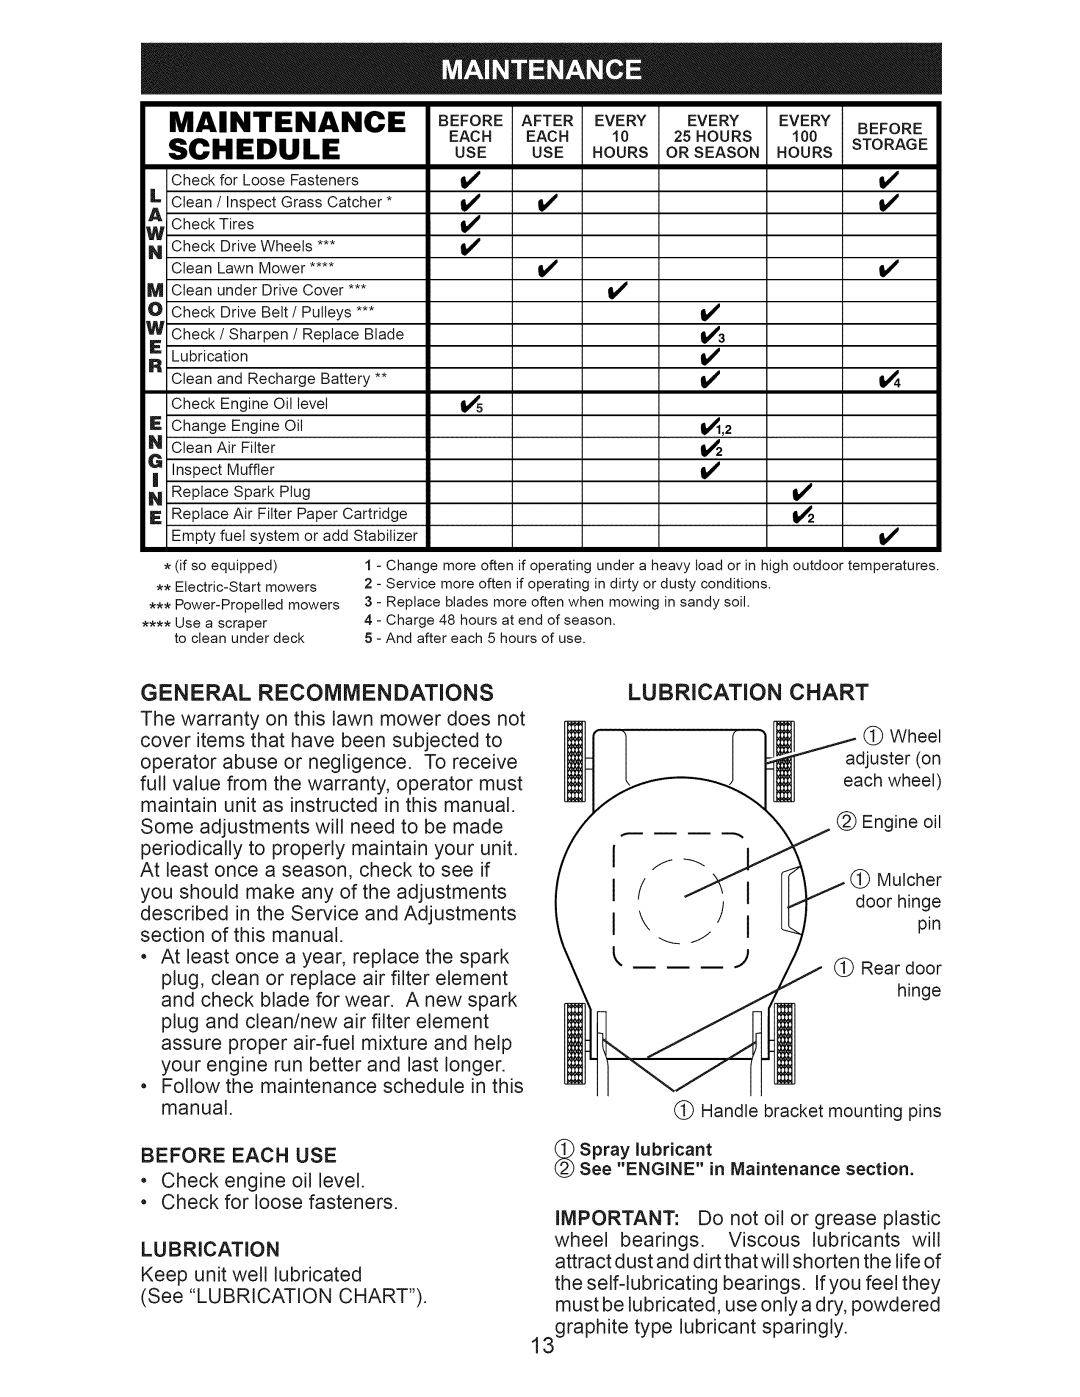 Craftsman 917.374361 owner manual Maintenance, Schedule, Use Hours 